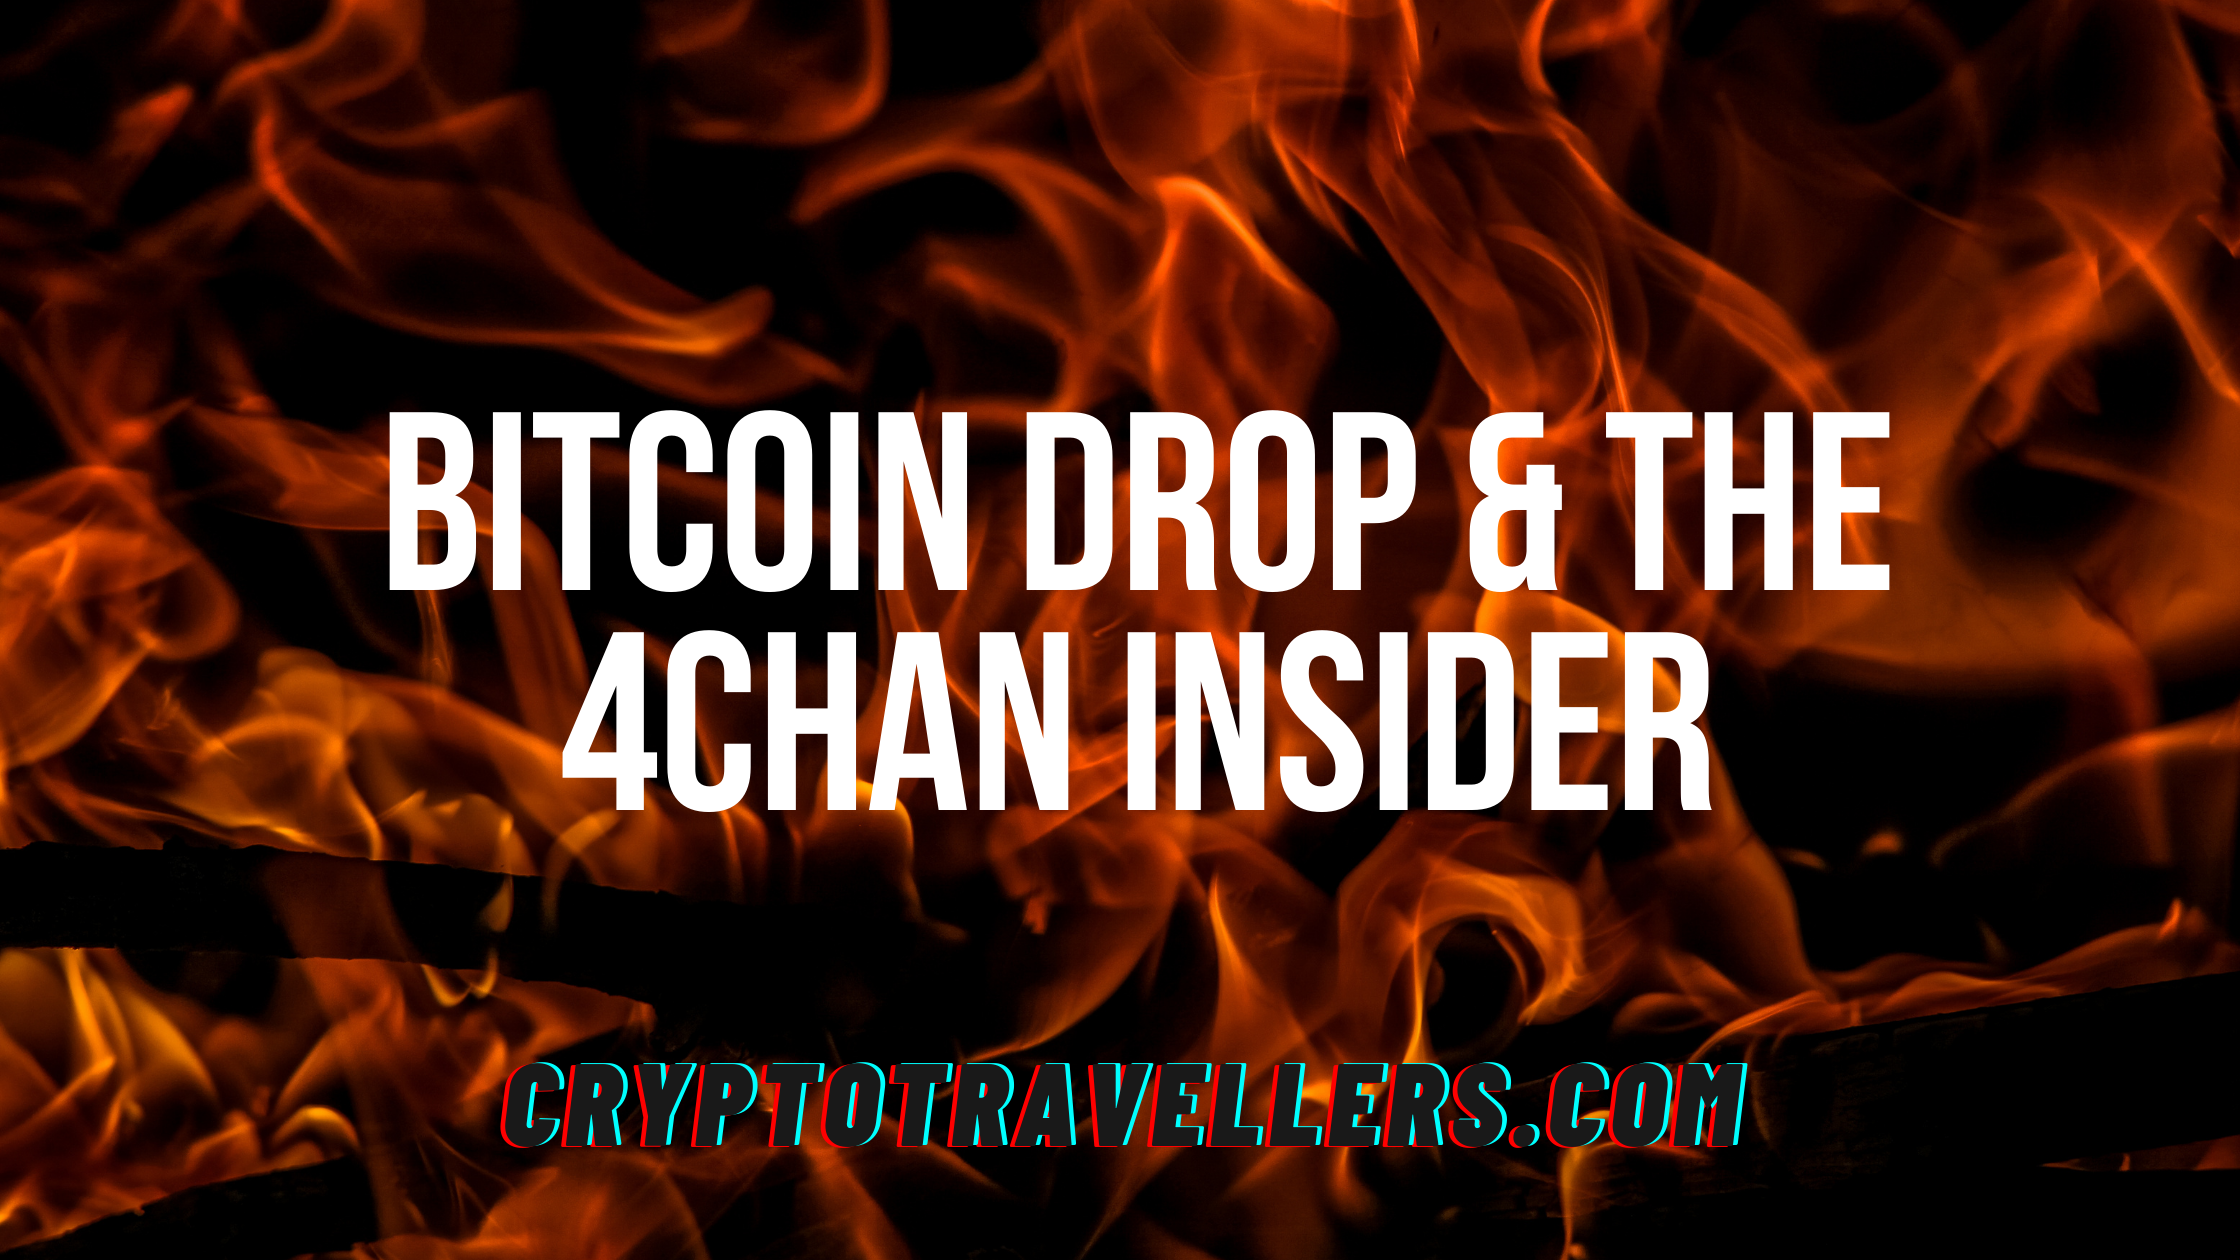 Bitcoin drop predicted by an insider on 4Chan? 